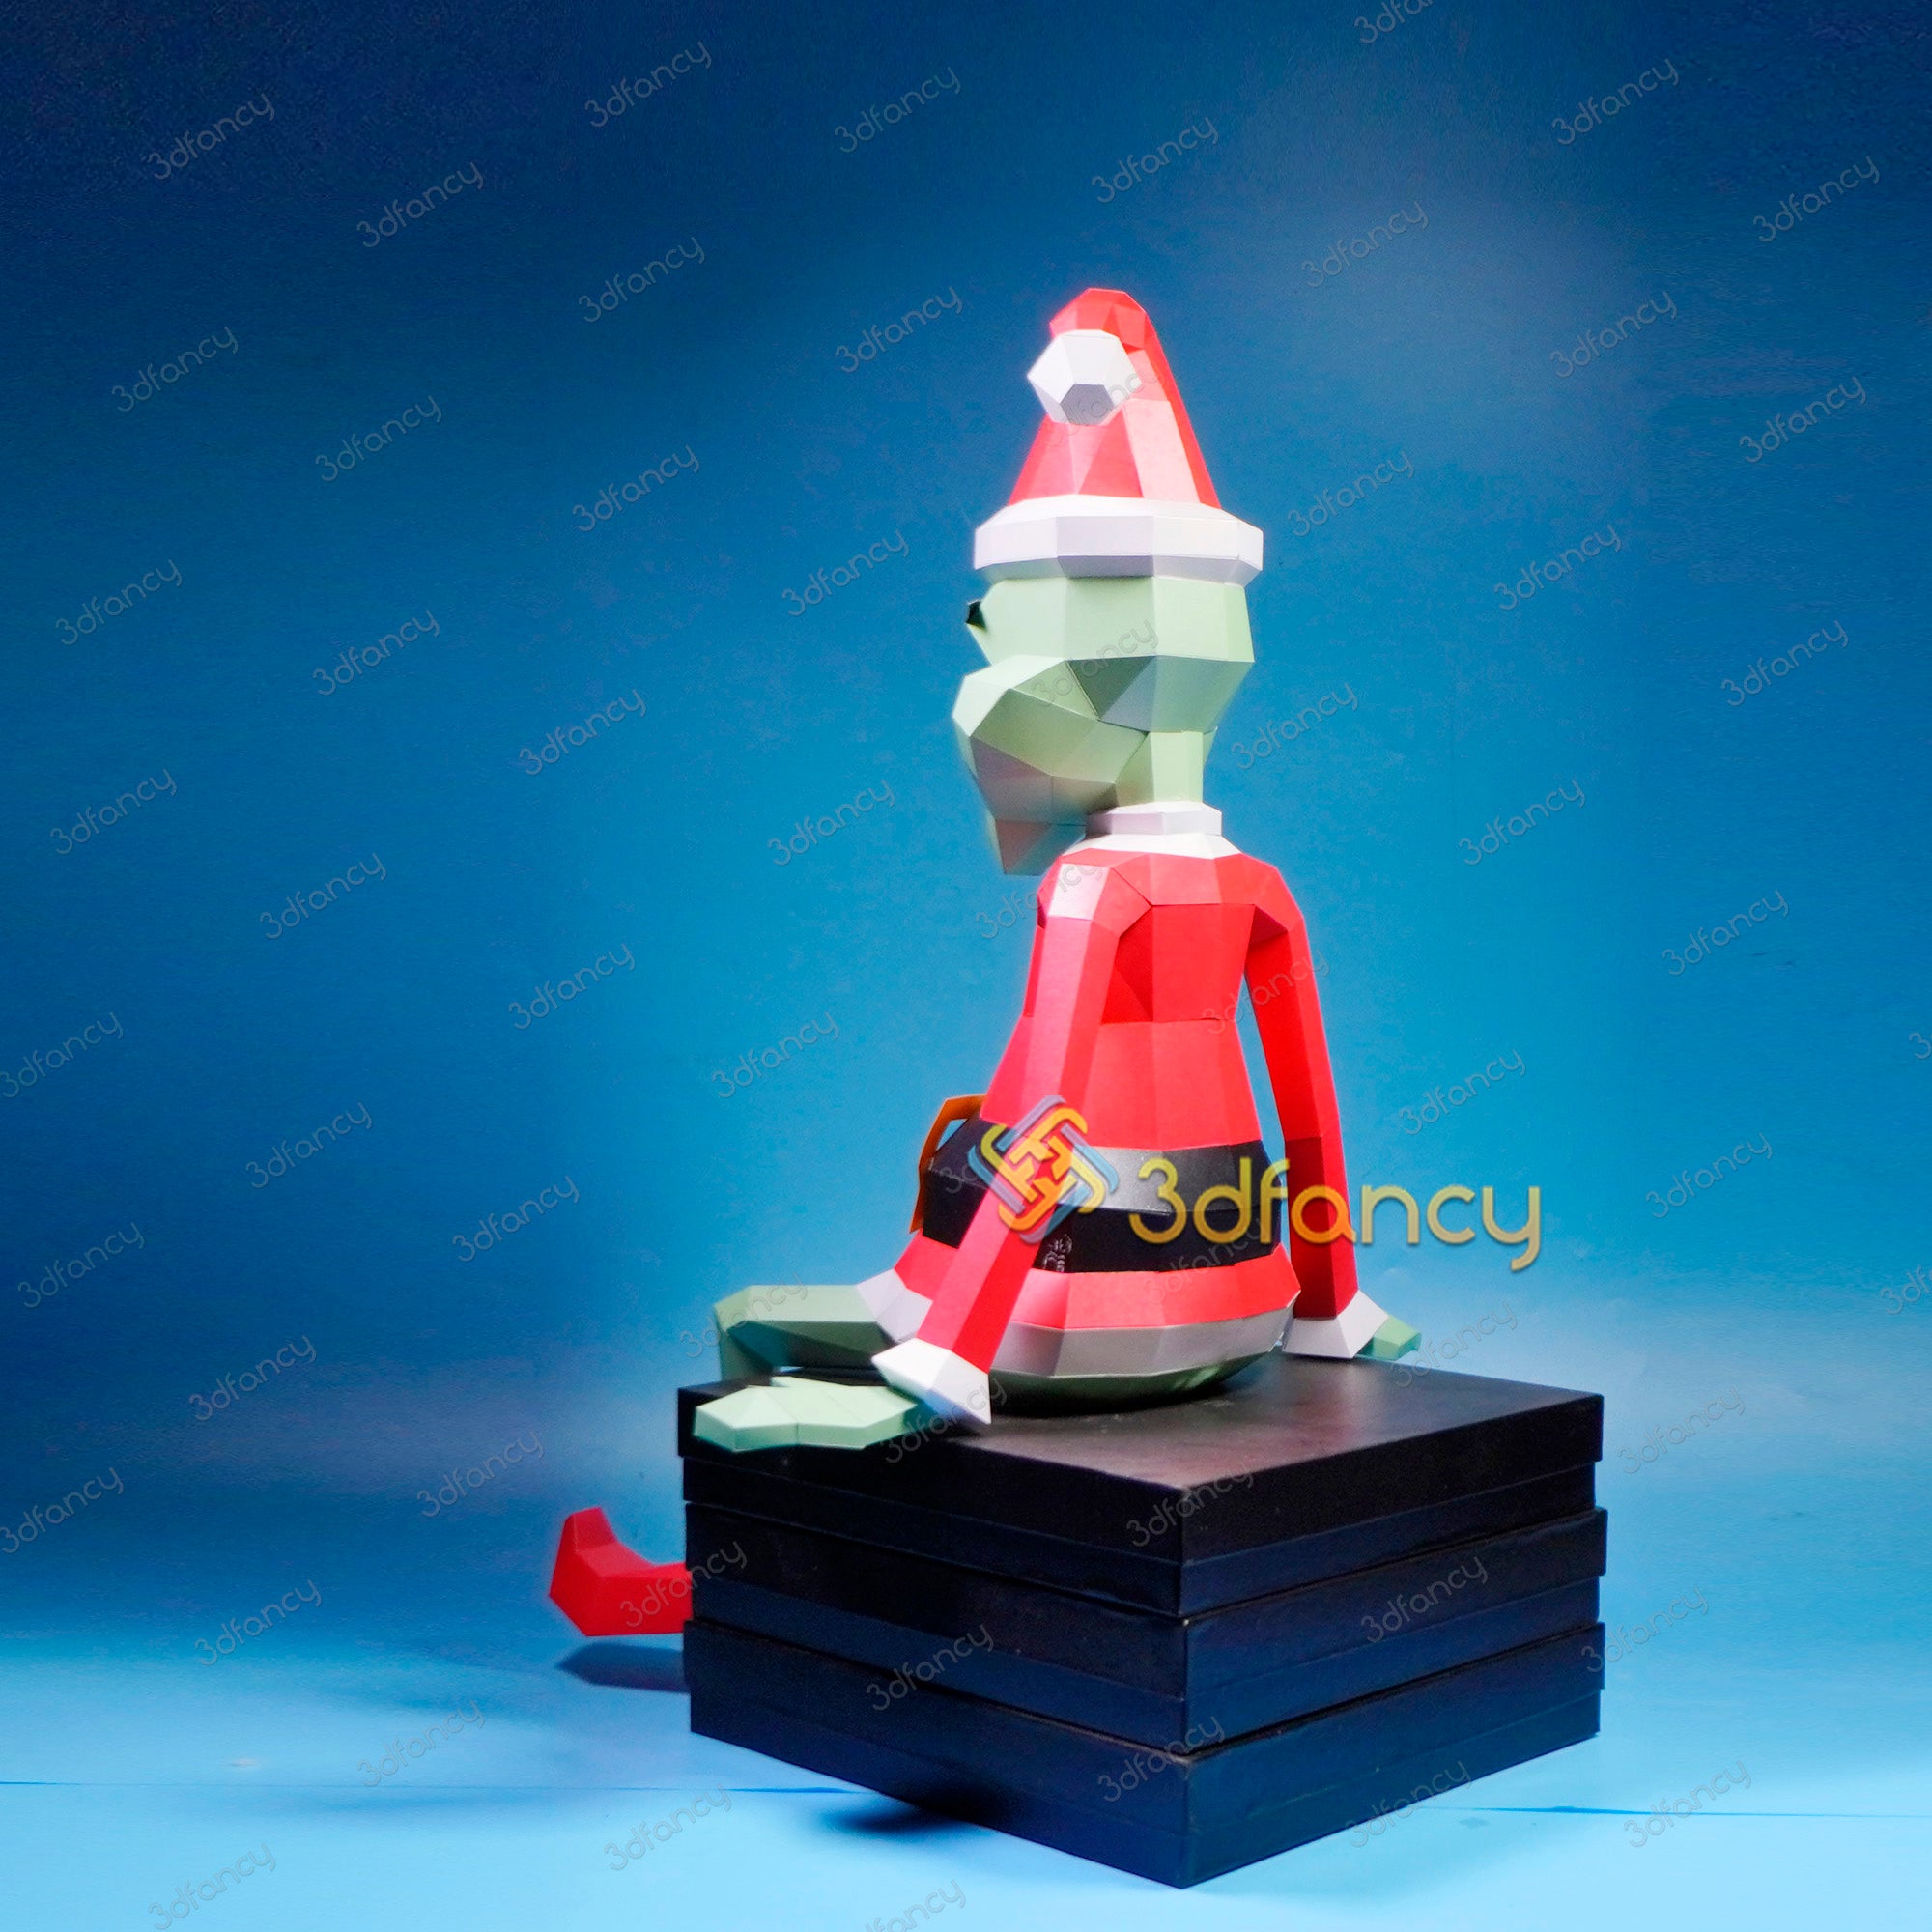 The Grinch Papercraft PDF for Printer, SVG for Cricut Projects - DIY Low Poly Grinch Paper Sculpture for Christmas Decoration, 3D Grinch svg